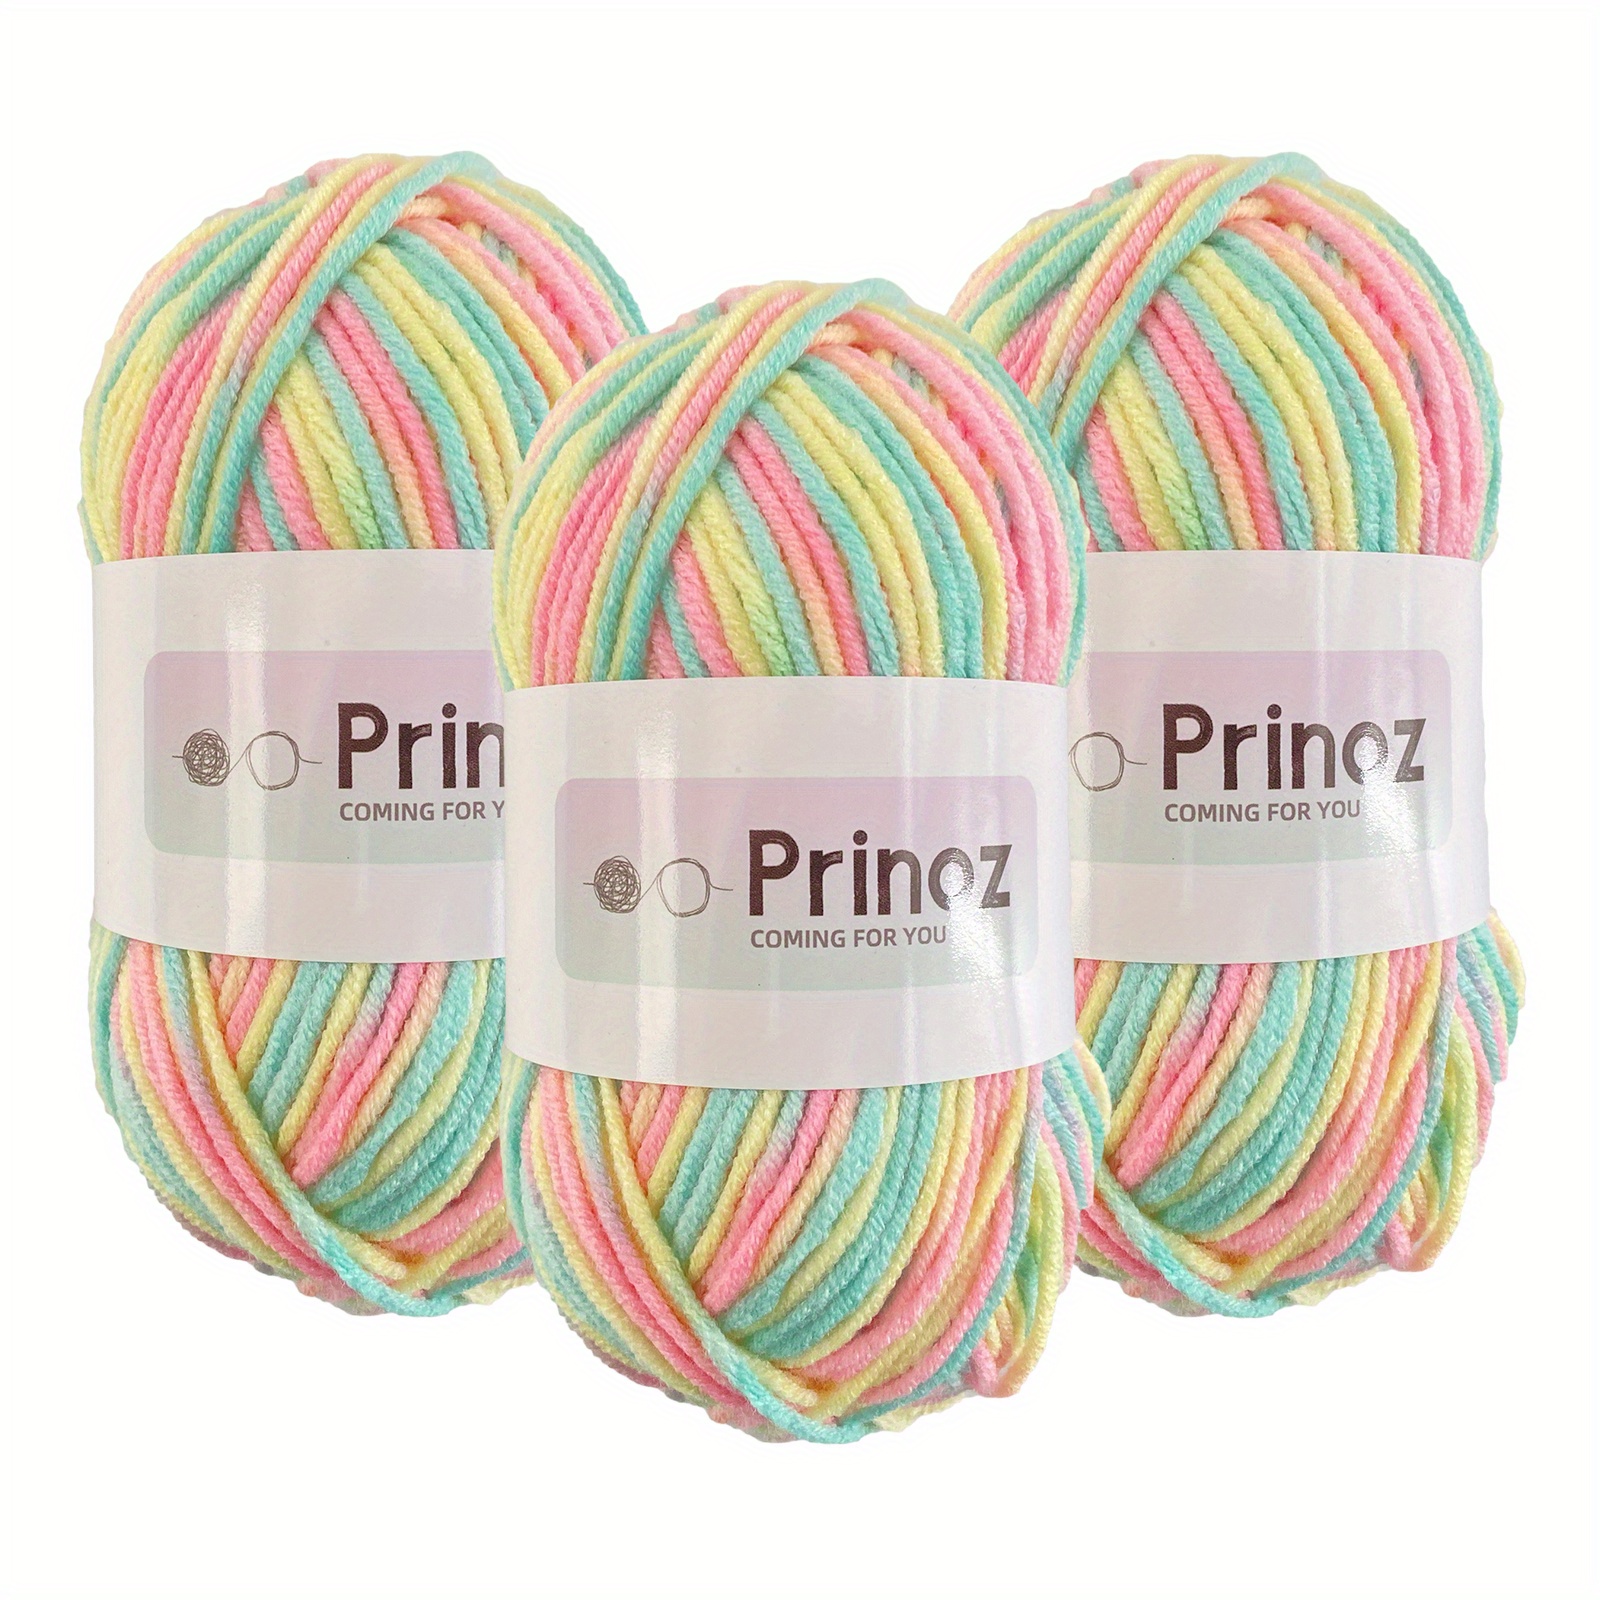 1 Skein 5-ply Rainbow Color Yarn For DIY Crocheting And Knitting Hat,  Scarf, Sweater And Crafts, 100g